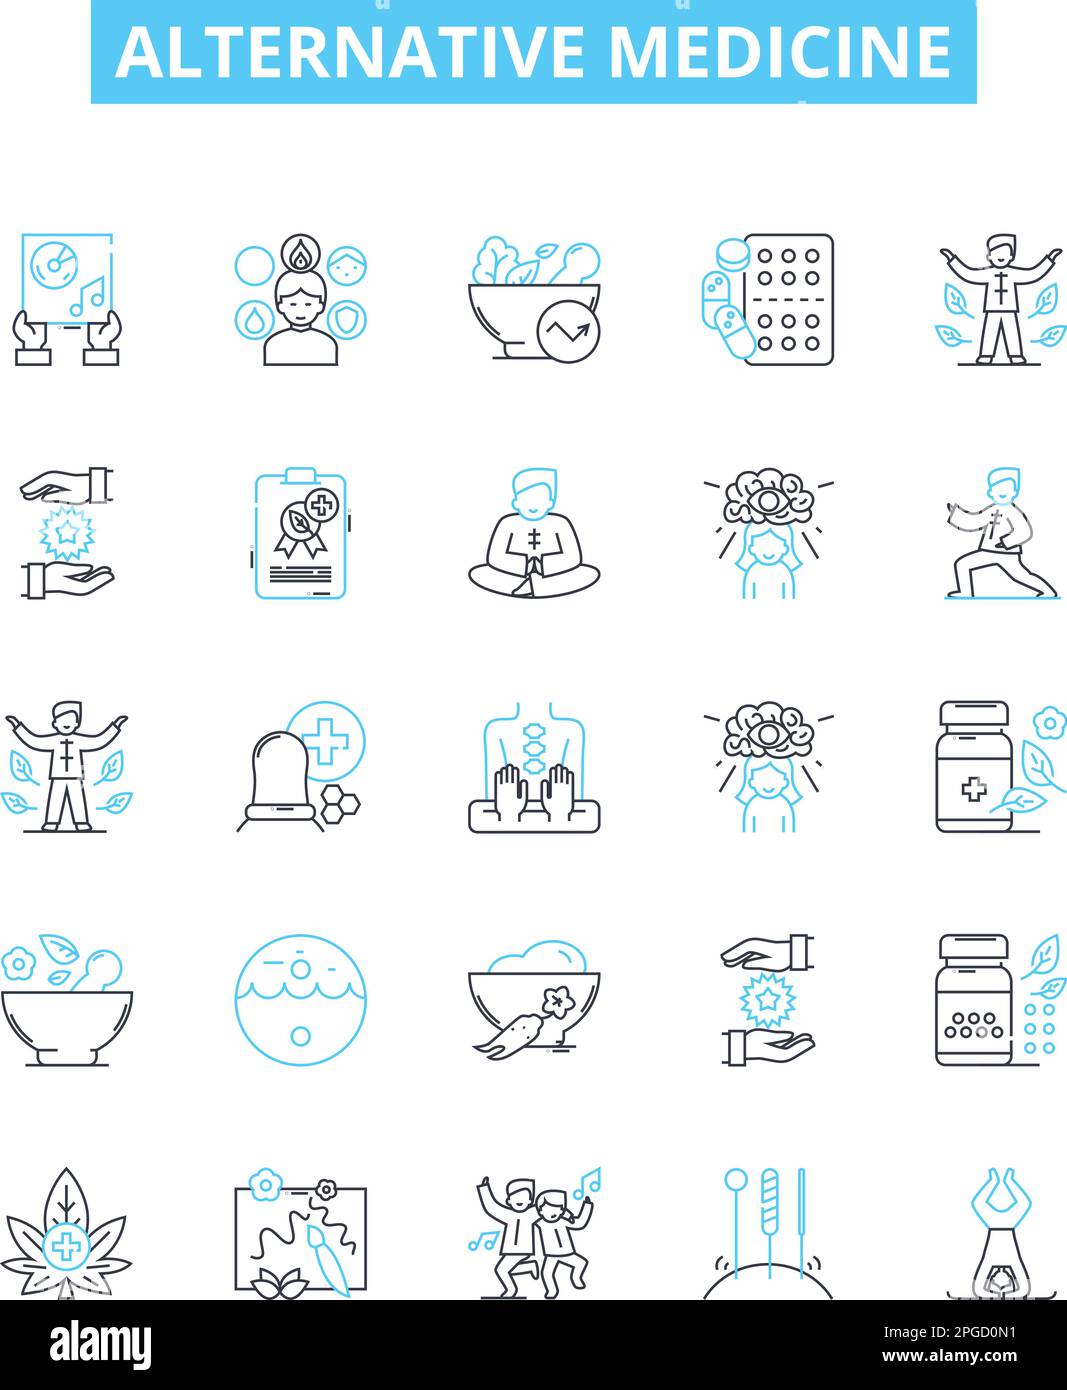 Alternative medicine vector line icons set. Holistic, Naturopathy, Homeopathy, Acupuncture, Ayurveda, Reiki, Aromatherapy illustration outline concept Stock Vector